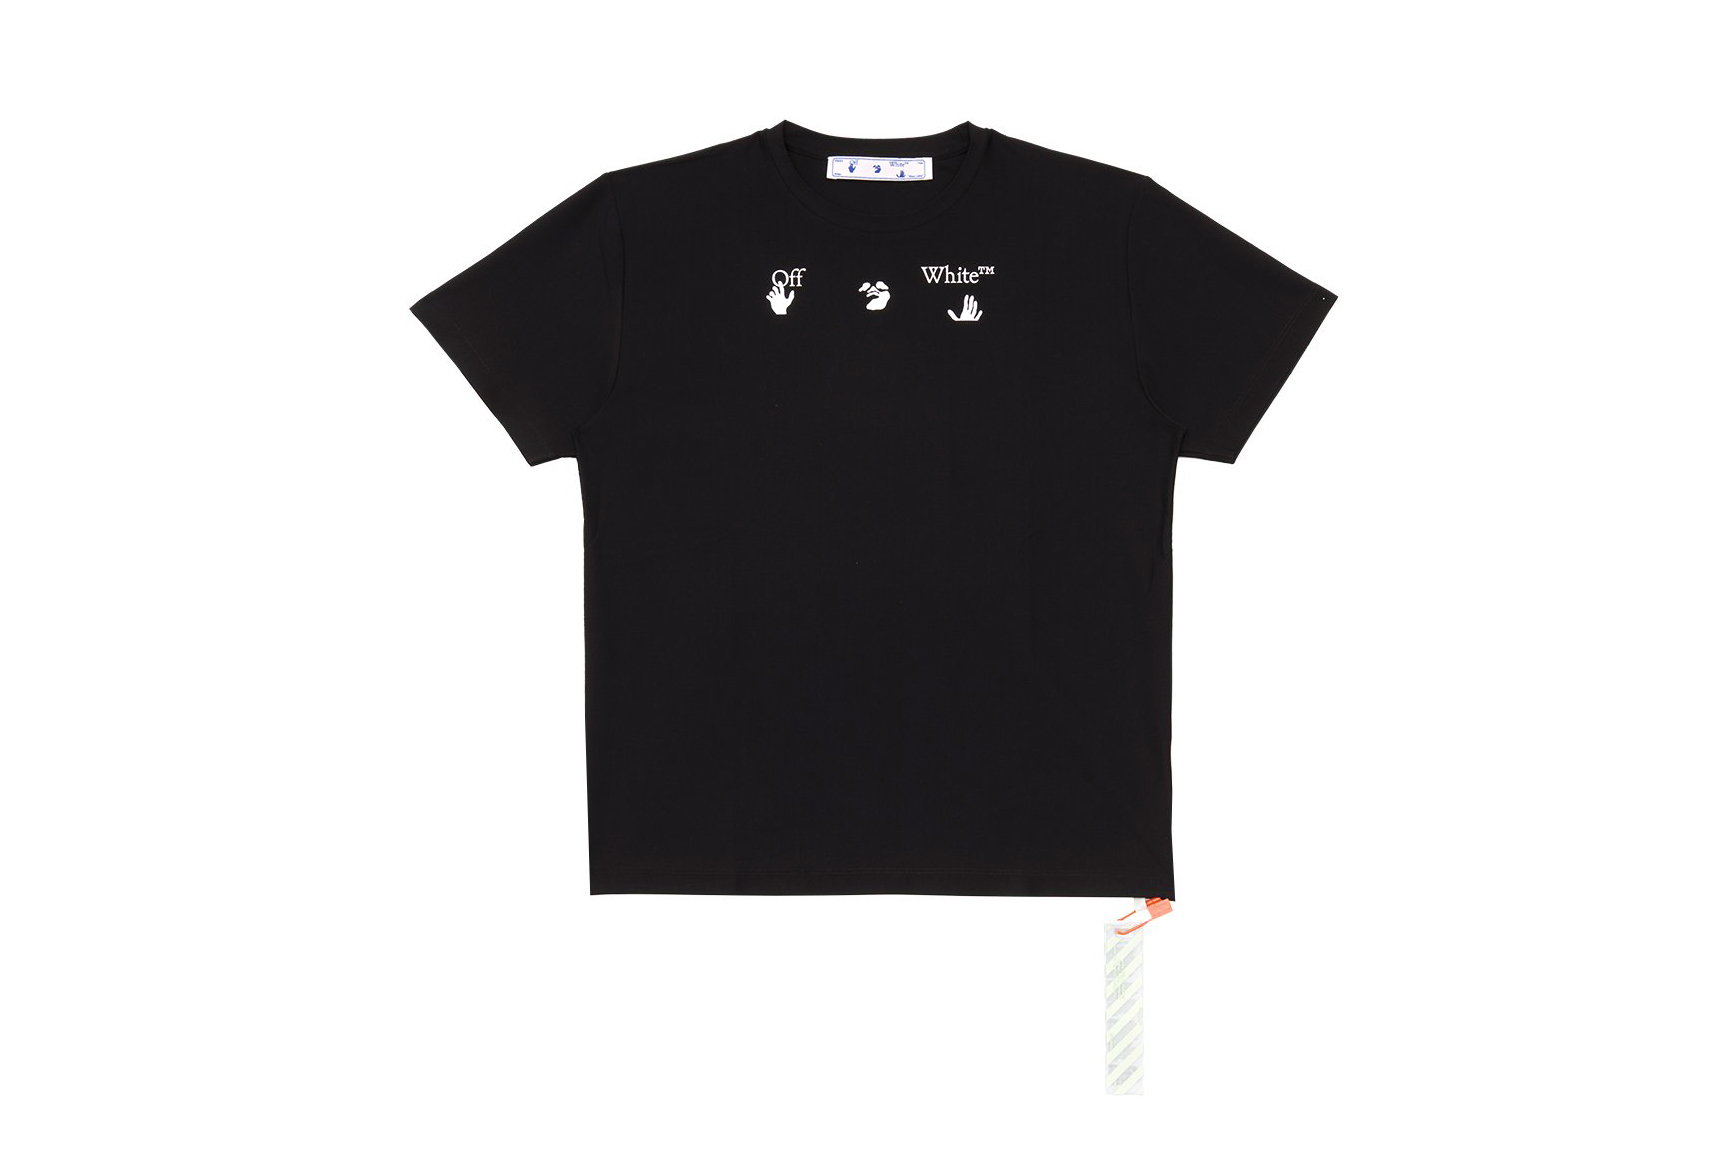 Off-White™ LOGO T-SHIRT" Release Price/Date | Drops |